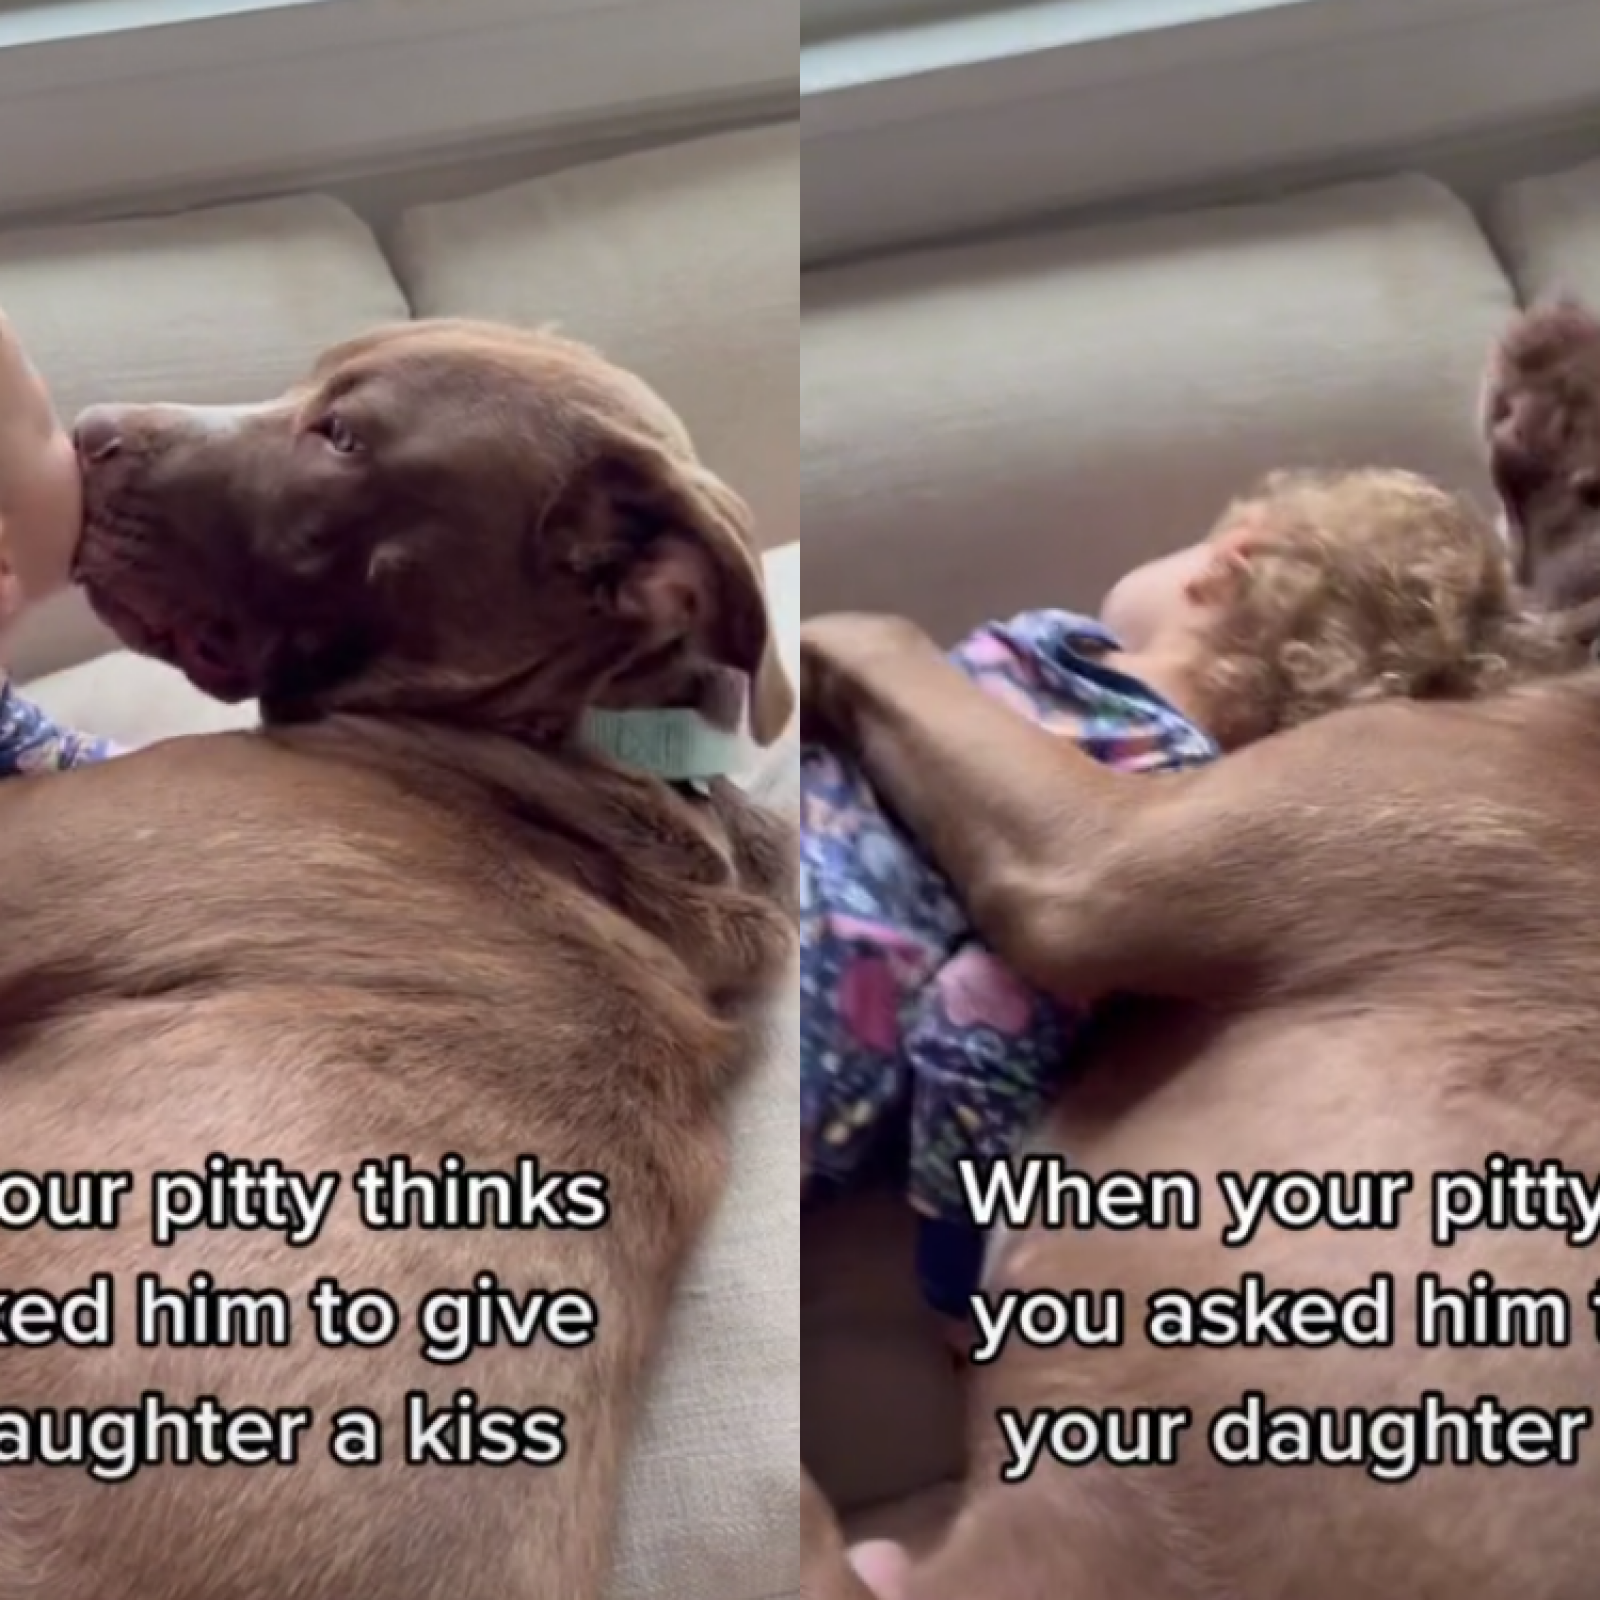 Pit Bull Gives Toddler Kiss and Cuddle in Heartwarming Video: 'So